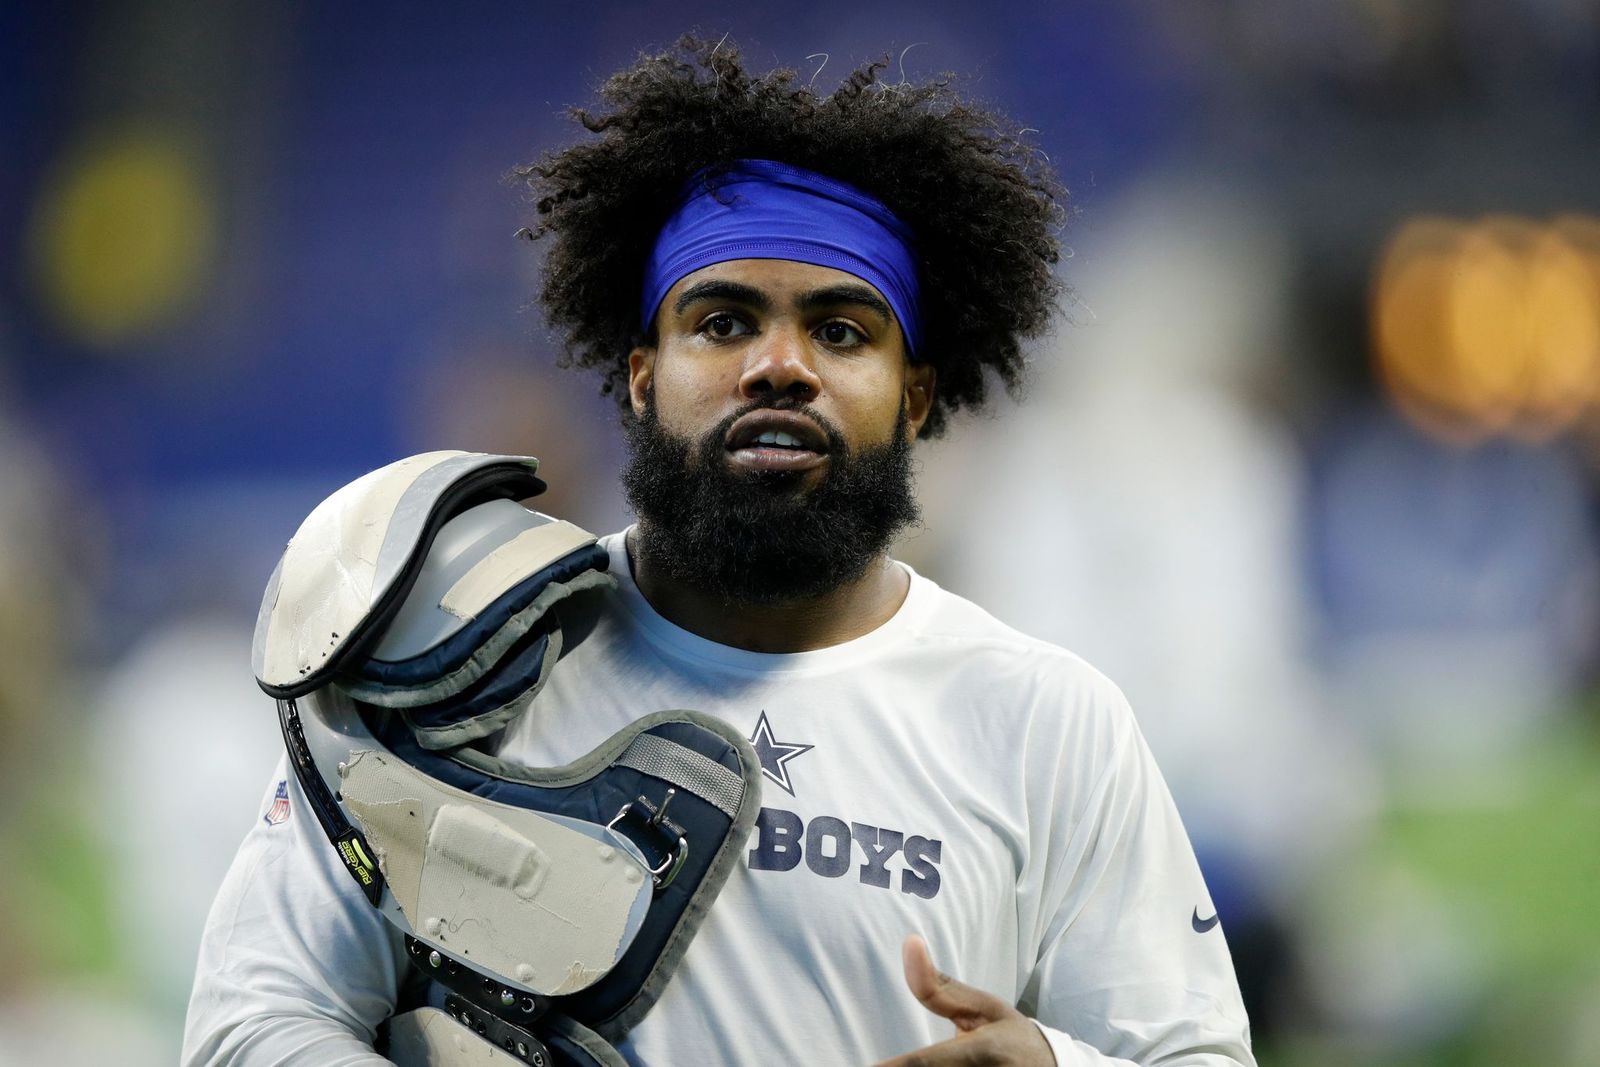 Ezekiel Elliot after a loss to the Indianapolis Colts at the Lucas Oil Stadium on December 16, 2018, in Indianapolis, Indiana | Photo: Joe Robbins/Getty Images